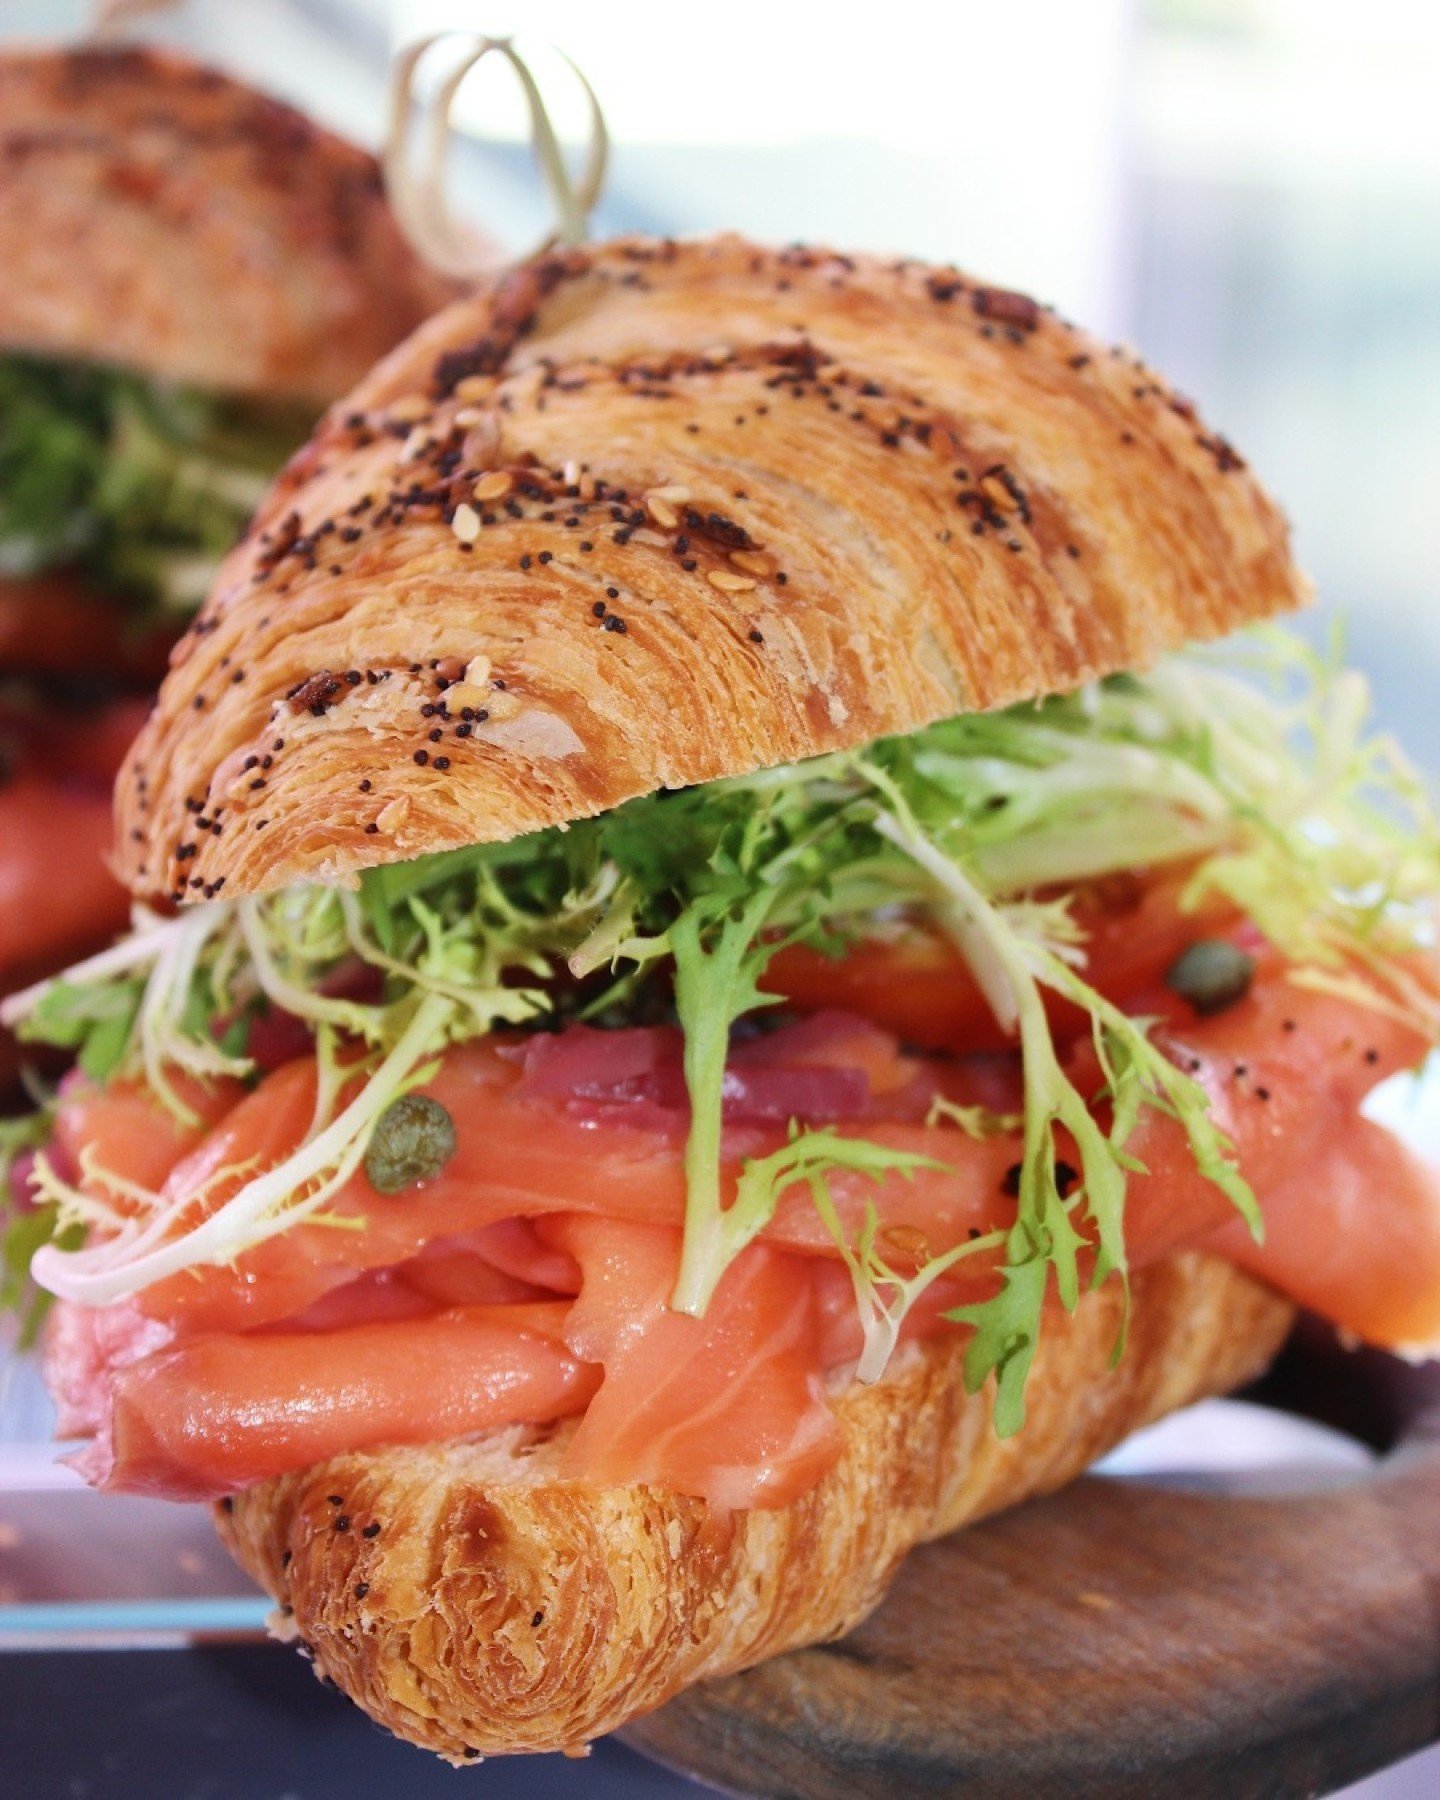 Looking for a smoked salmon sandwich? We've got you covered! 

*
*
*
*
*
#atyhospitality #siftmystic #siftniantic #siftwatchill #siftbakeshop #mysticct #downtownmystic #ct #pastrychef